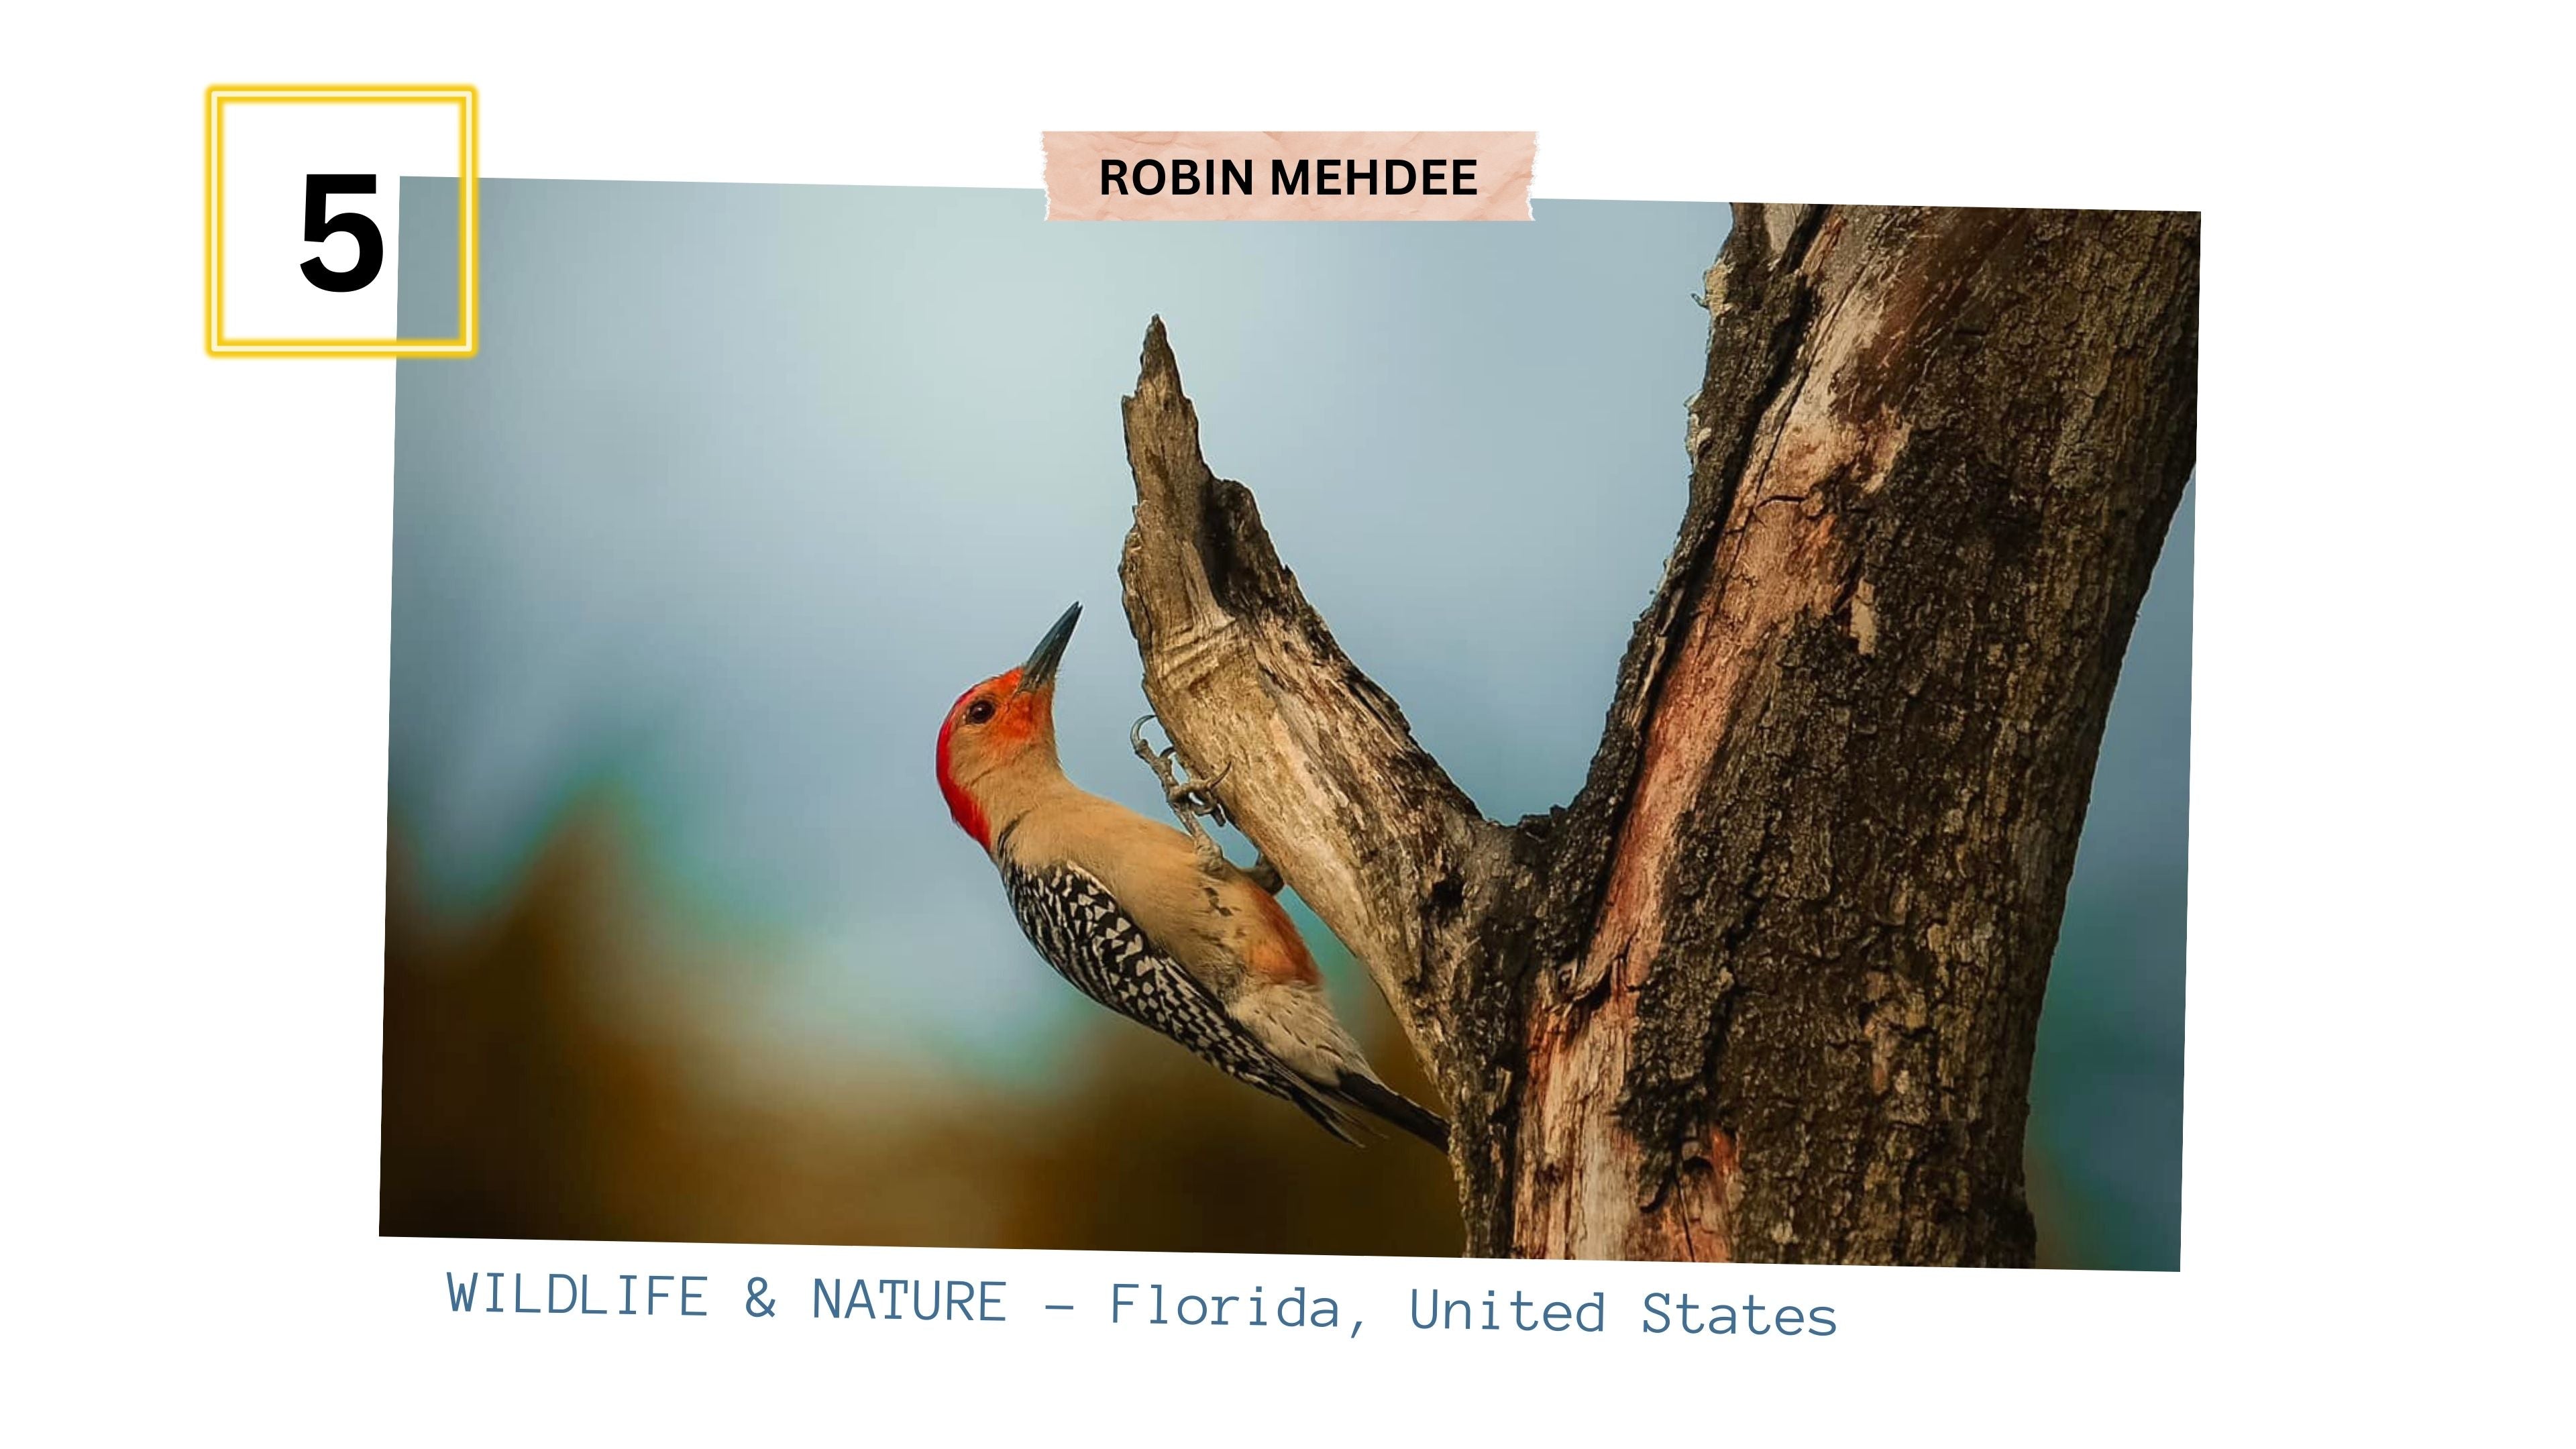 Load video: Wild Life &amp; Nature Video 4k by Robin Mehdee